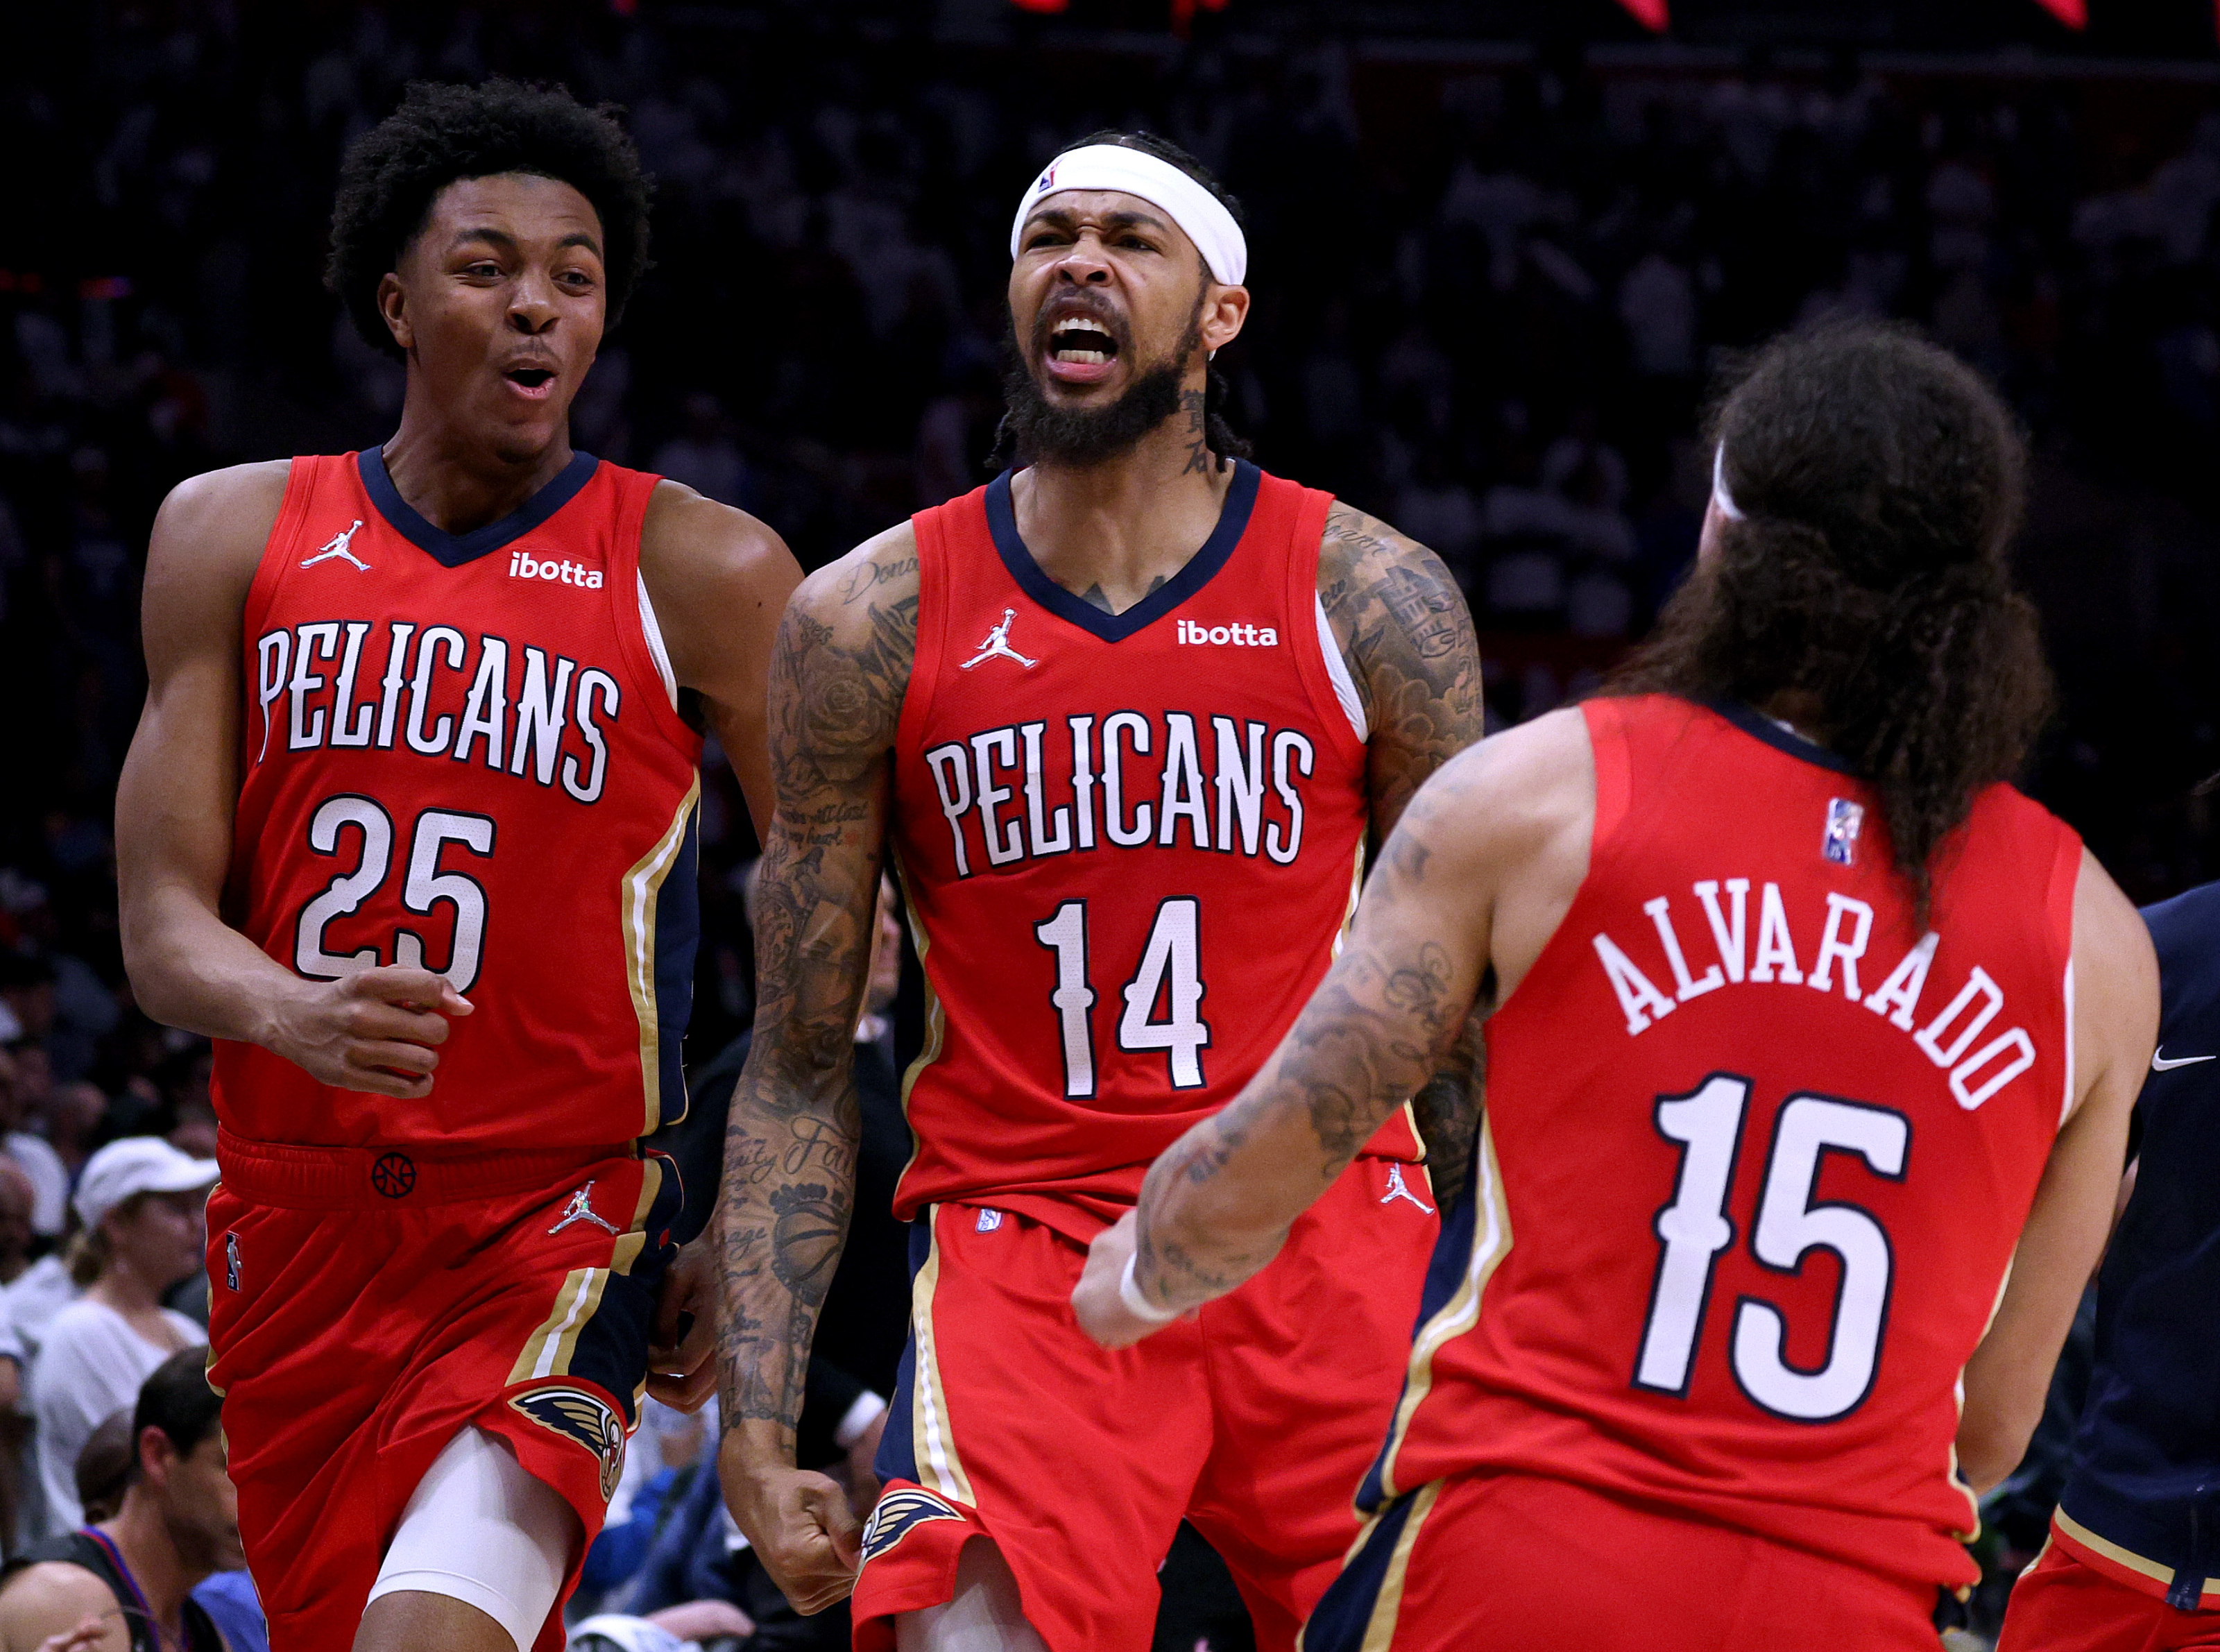 Pelicans basketball. It's back